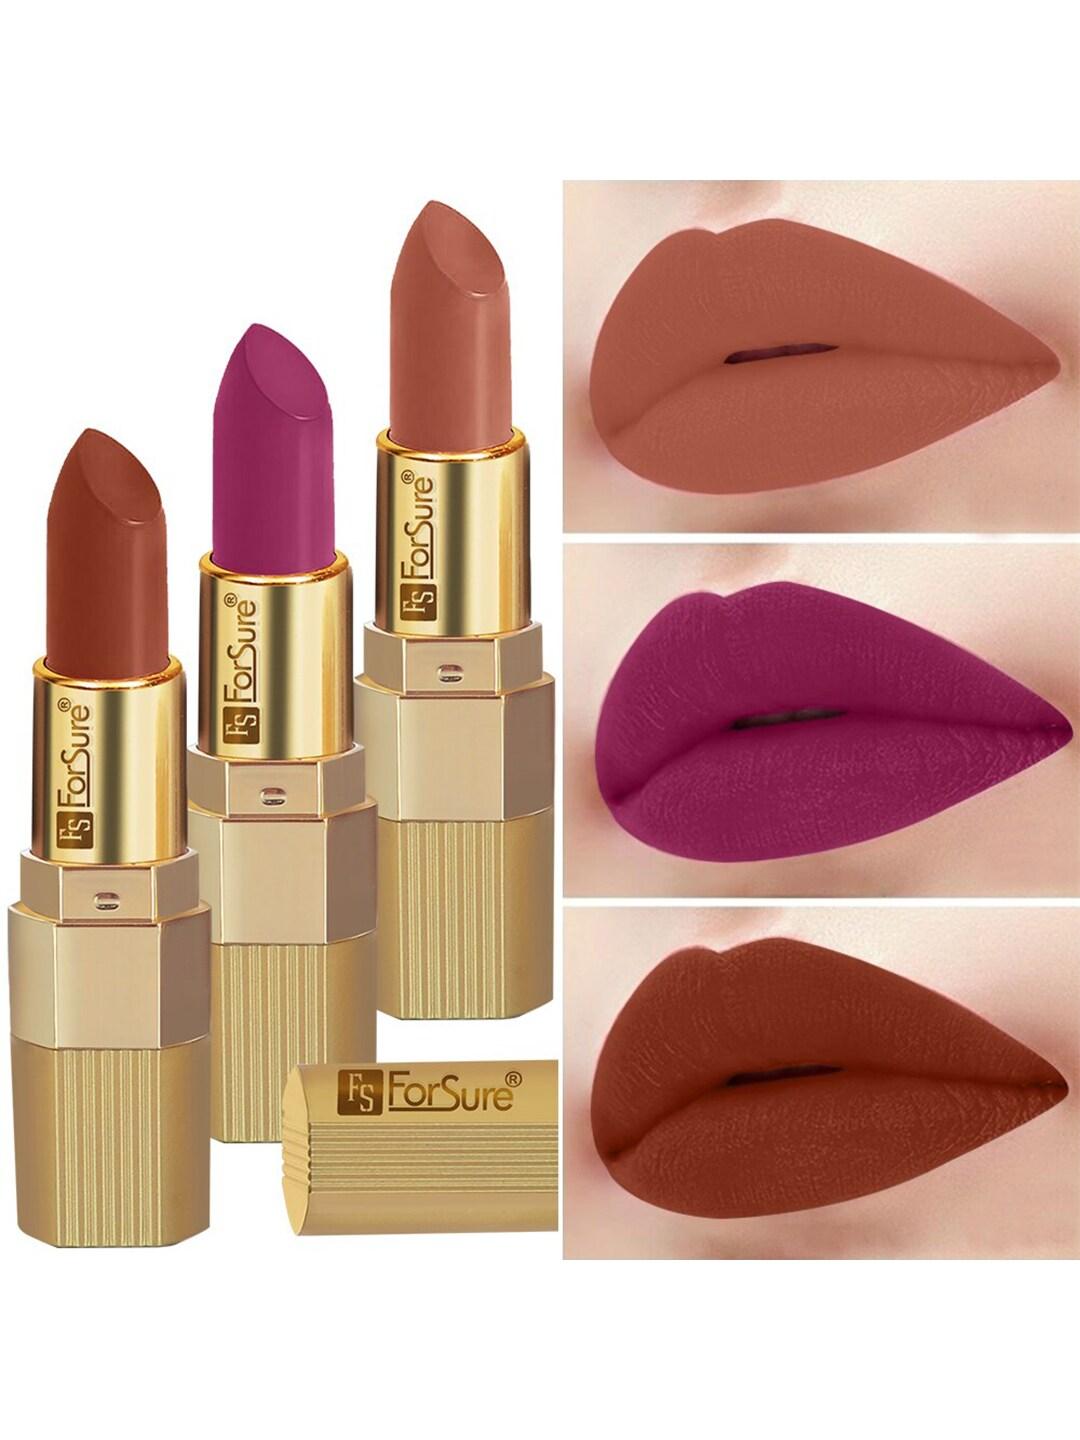 ForSure Set Of 3 Xpression Long-Lasting Highly-Pigmented Creamy Matte Lipstick - 3.5g each